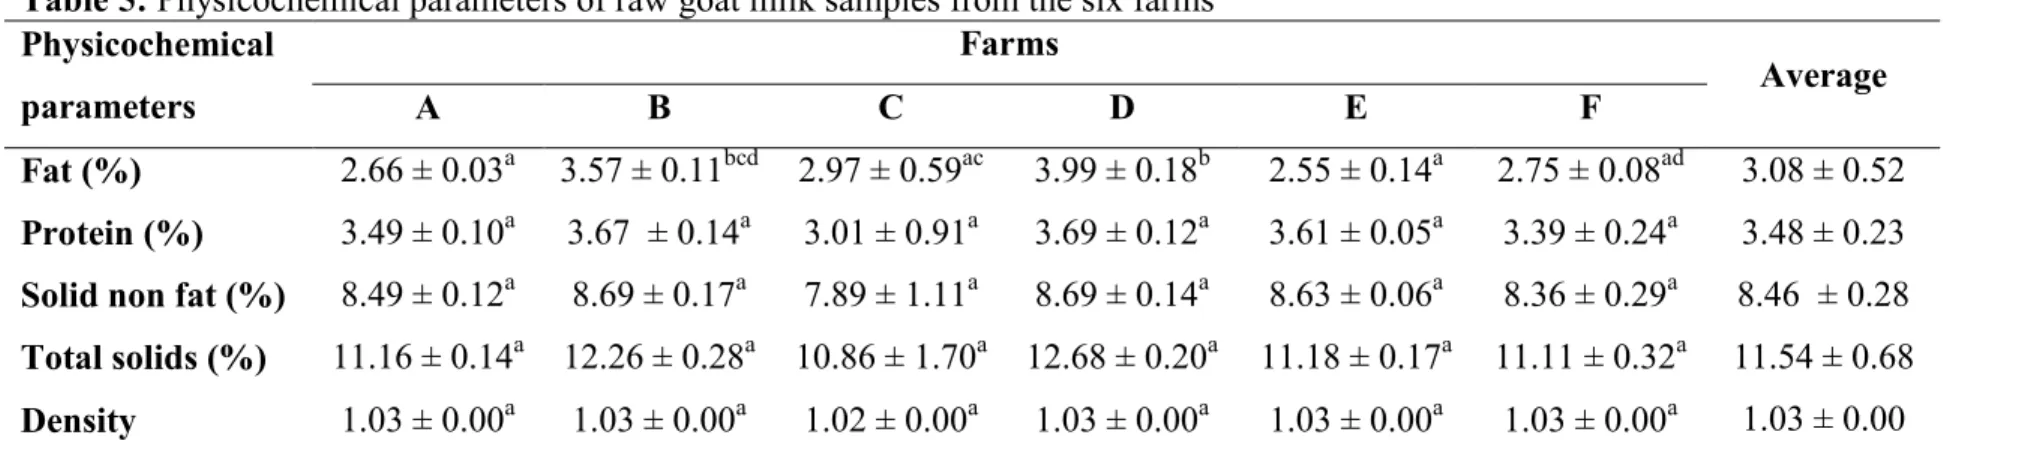 Table 5: Physicochemical parameters of raw goat milk samples from the six farms  Physicochemical  parameters  Farms  Average A B C D E F  Fat (%)  2.66 ± 0.03 a  3.57 ± 0.11 bcd  2.97 ± 0.59 ac  3.99 ± 0.18 b  2.55 ± 0.14 a  2.75 ± 0.08 ad 3.08 ± 0.52  Pro